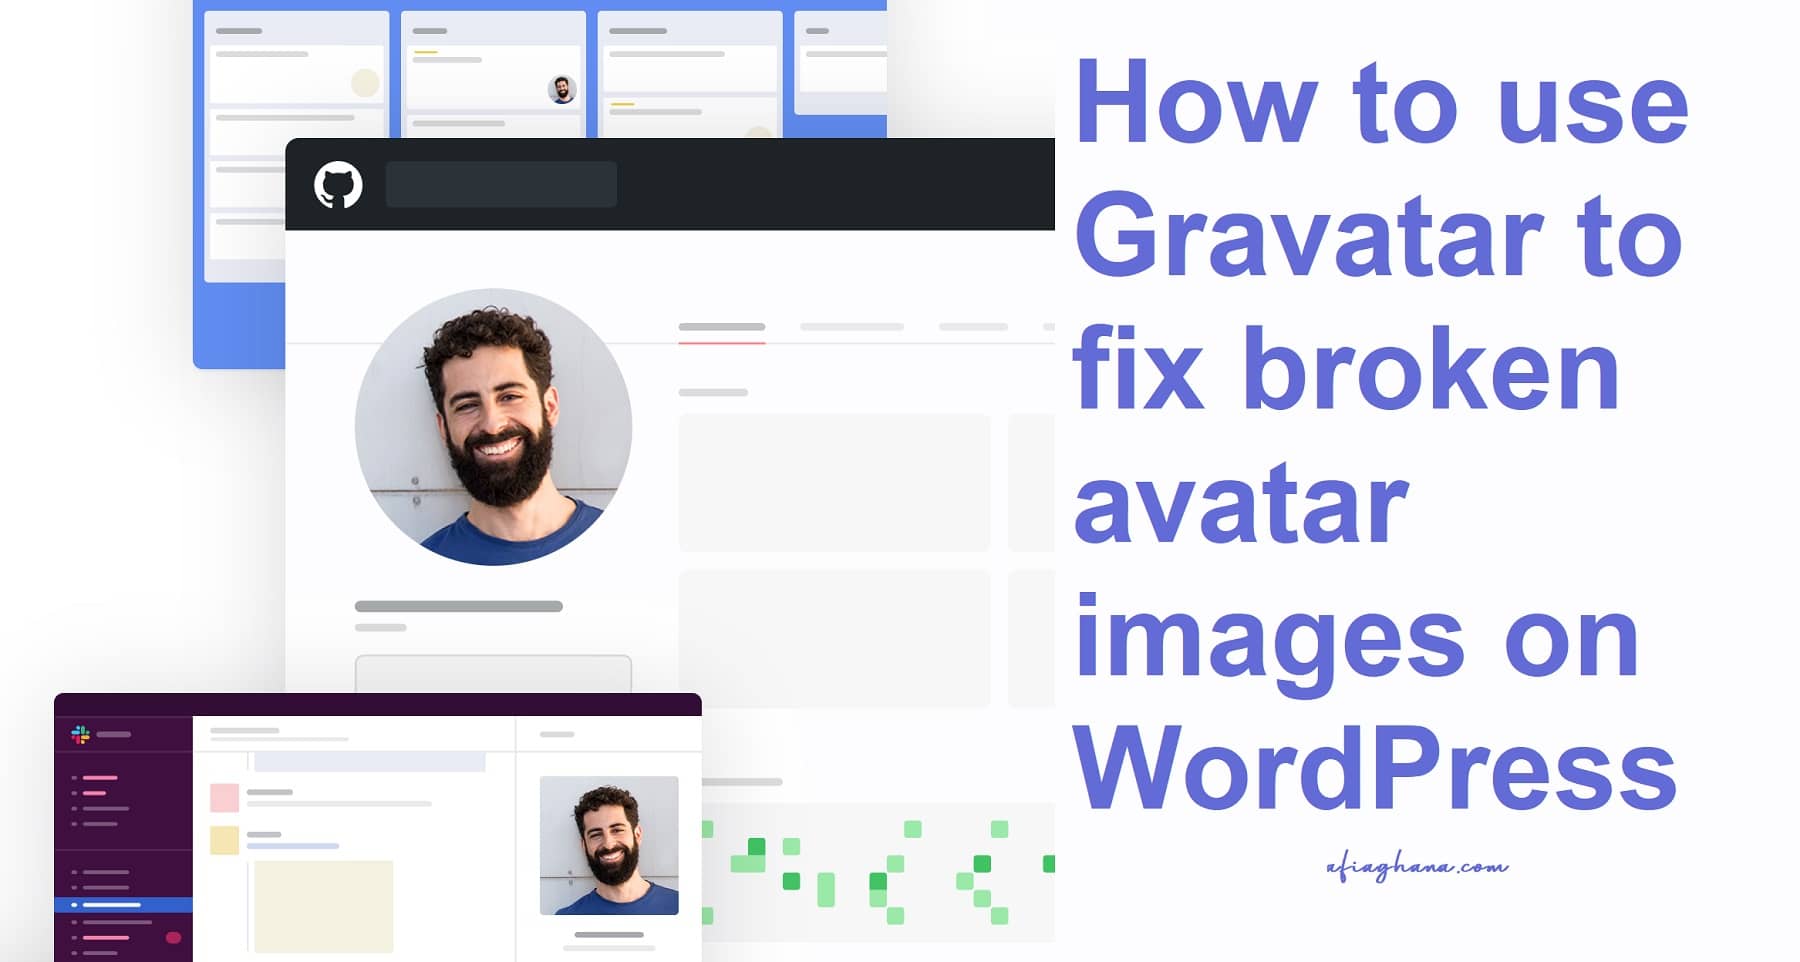 How to use Gravatar to fix broken avatar images on WordPress